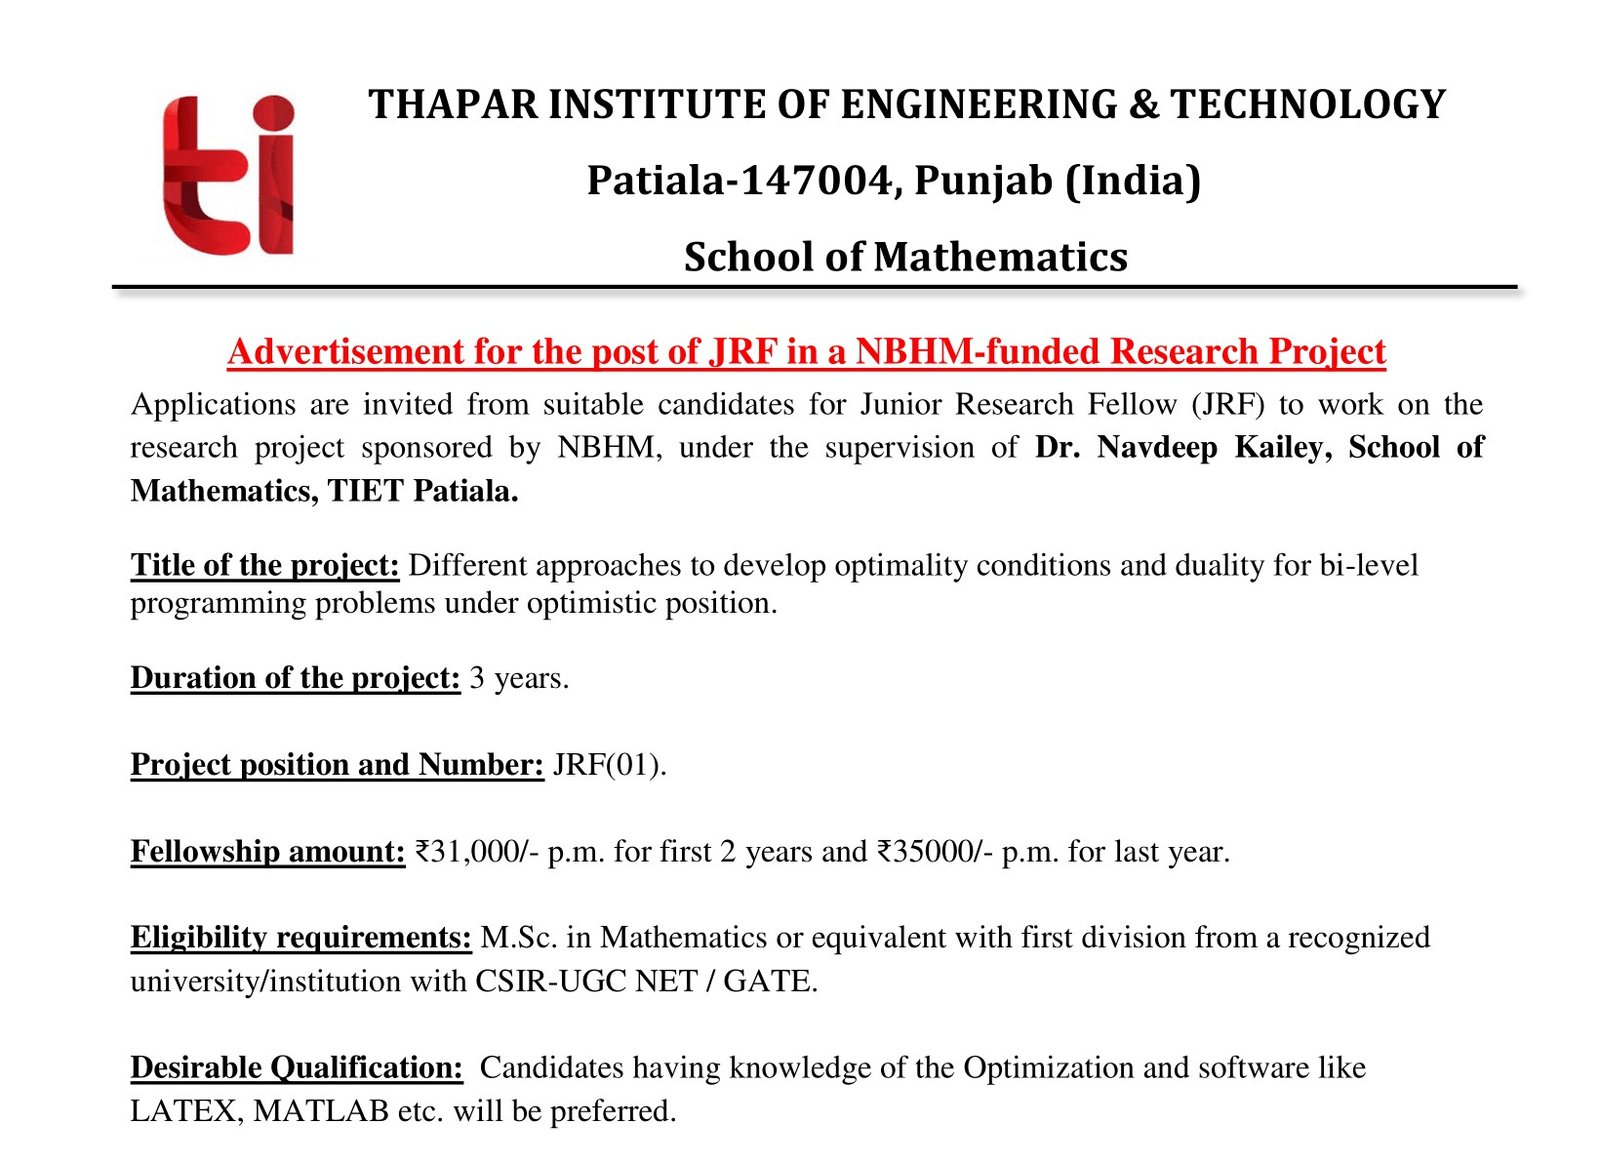 JRF in a NBHM-funded Research Project: THAPAR INSTITUTE OF ENGINEERING & TECHNOLOGY, Application of Deadline: June 20, 2023